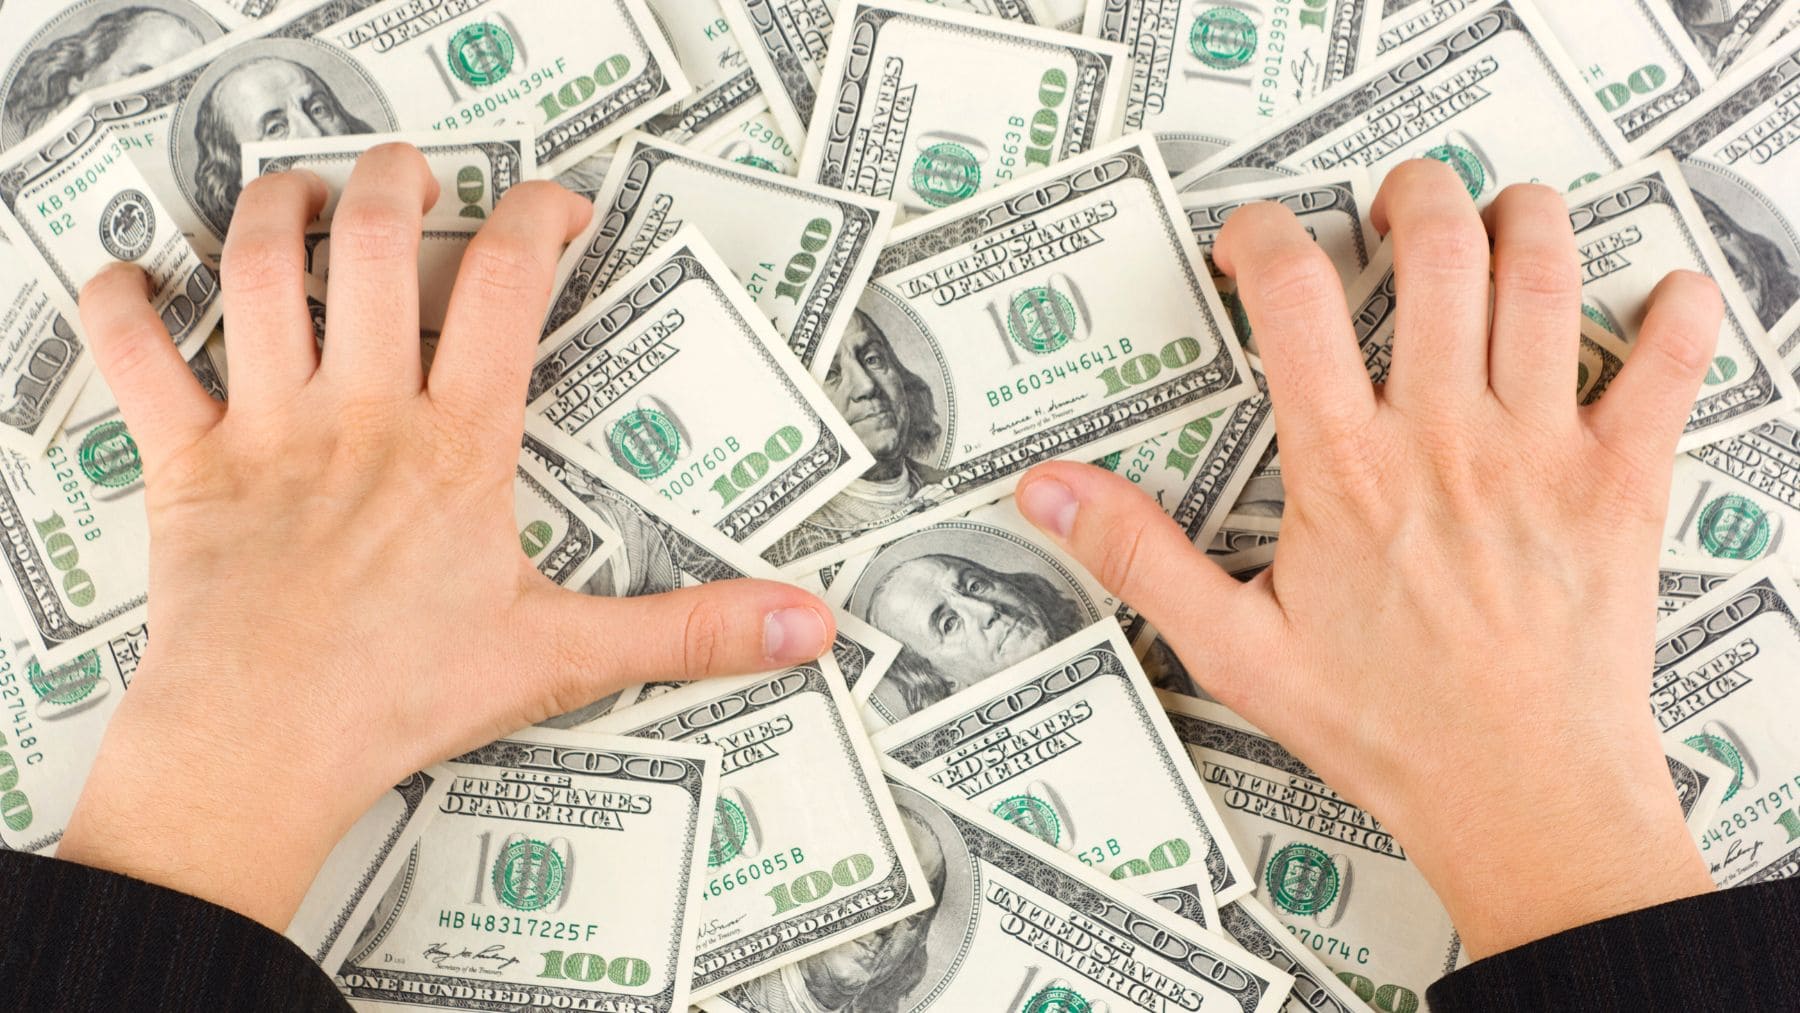 Hands grabbing some dollars from Supplemental Security Income